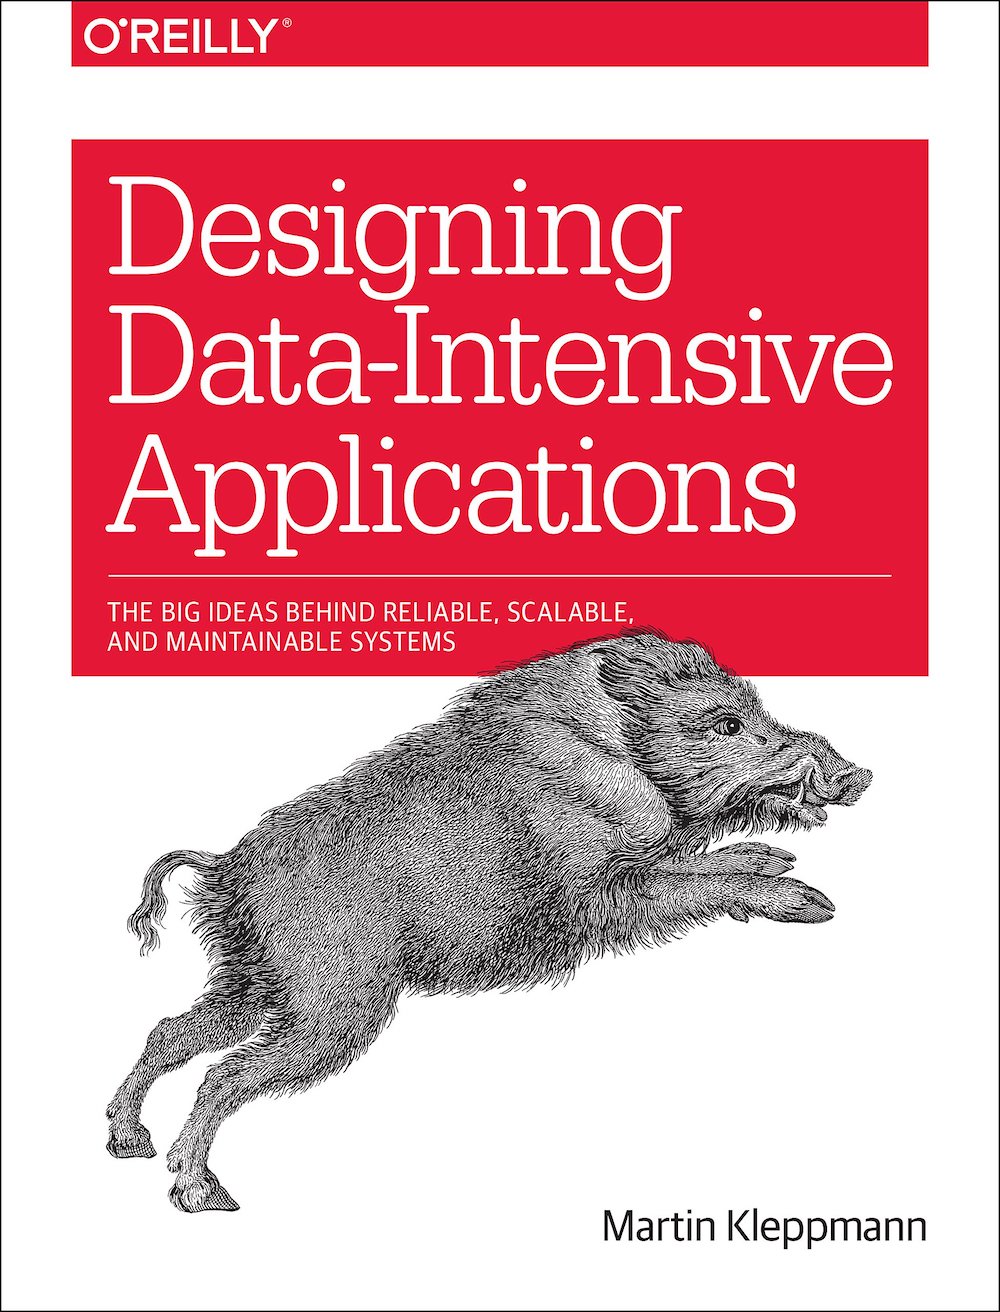 Designing Data-Intensive Applications - Chapter 3 - Storage and Retrieval